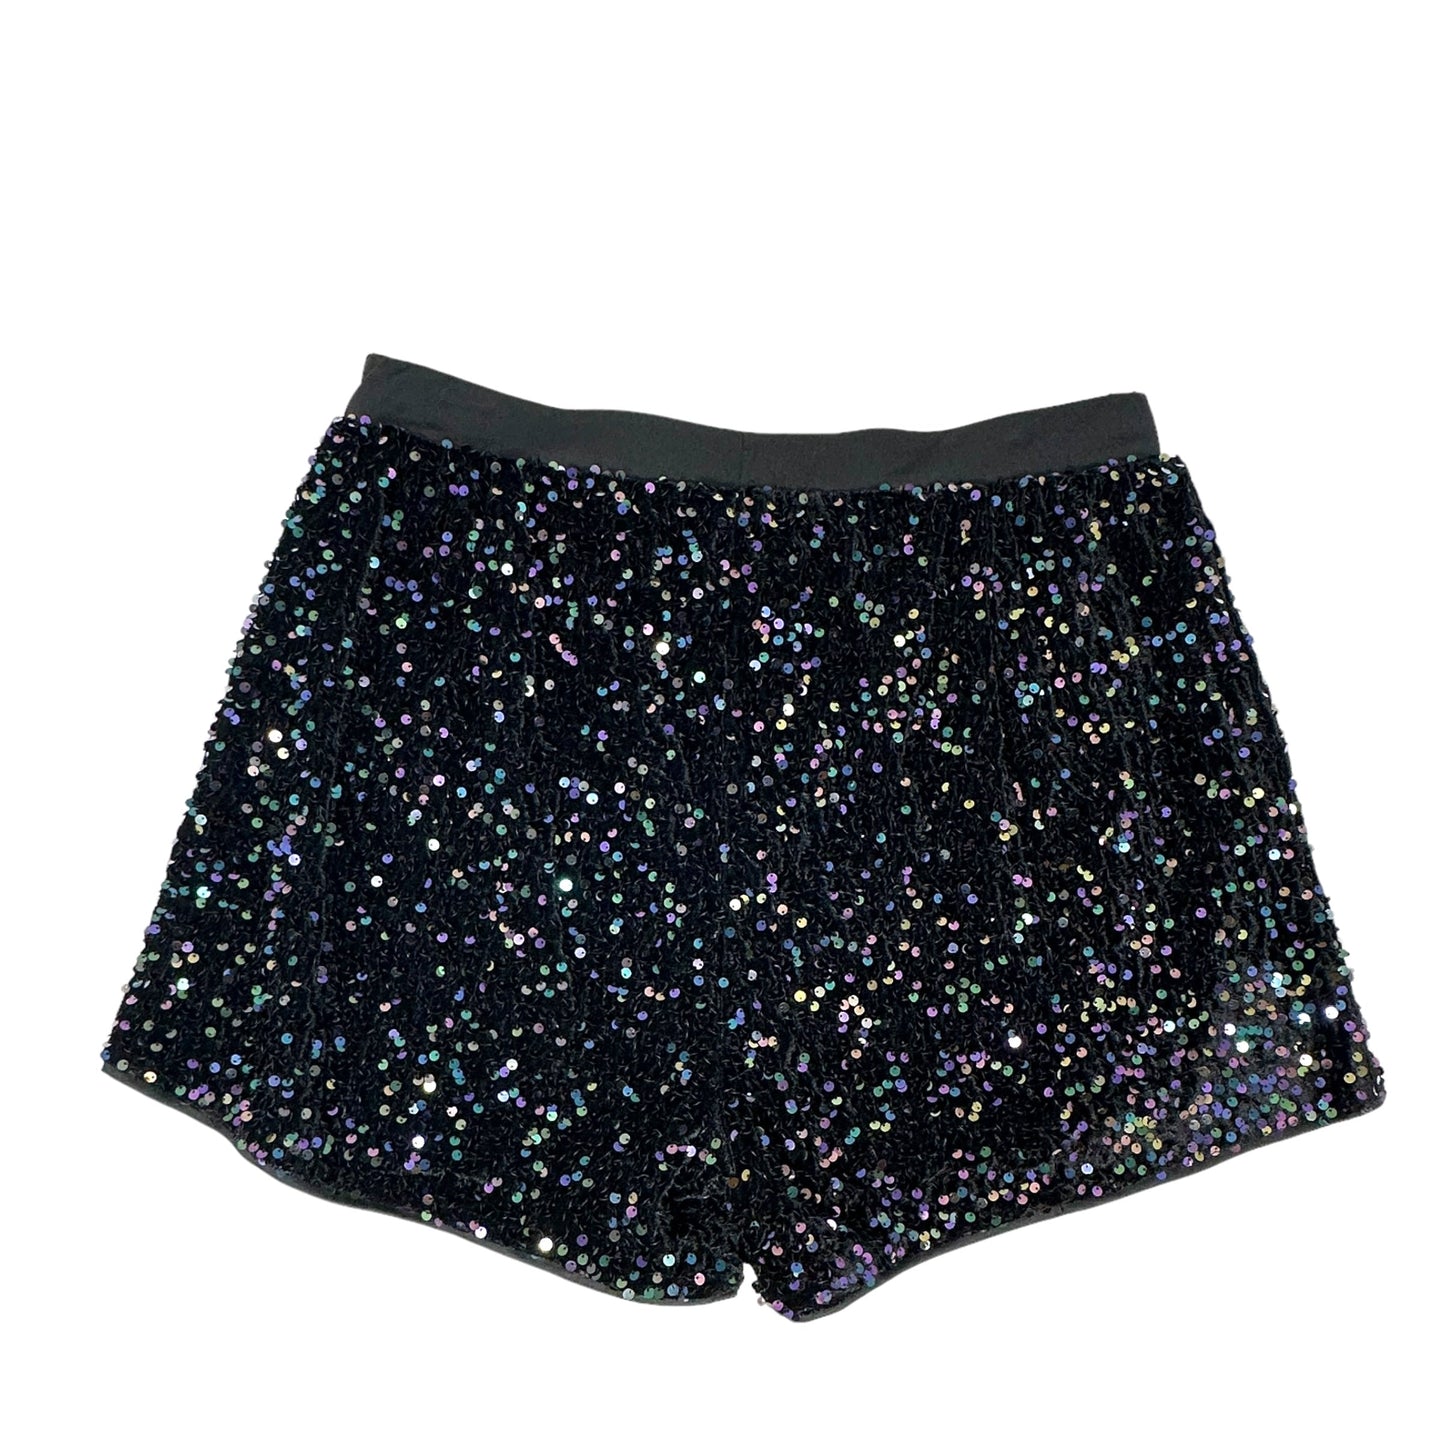 Black Sequin Lined Shorts Shein Curve, Size 1X